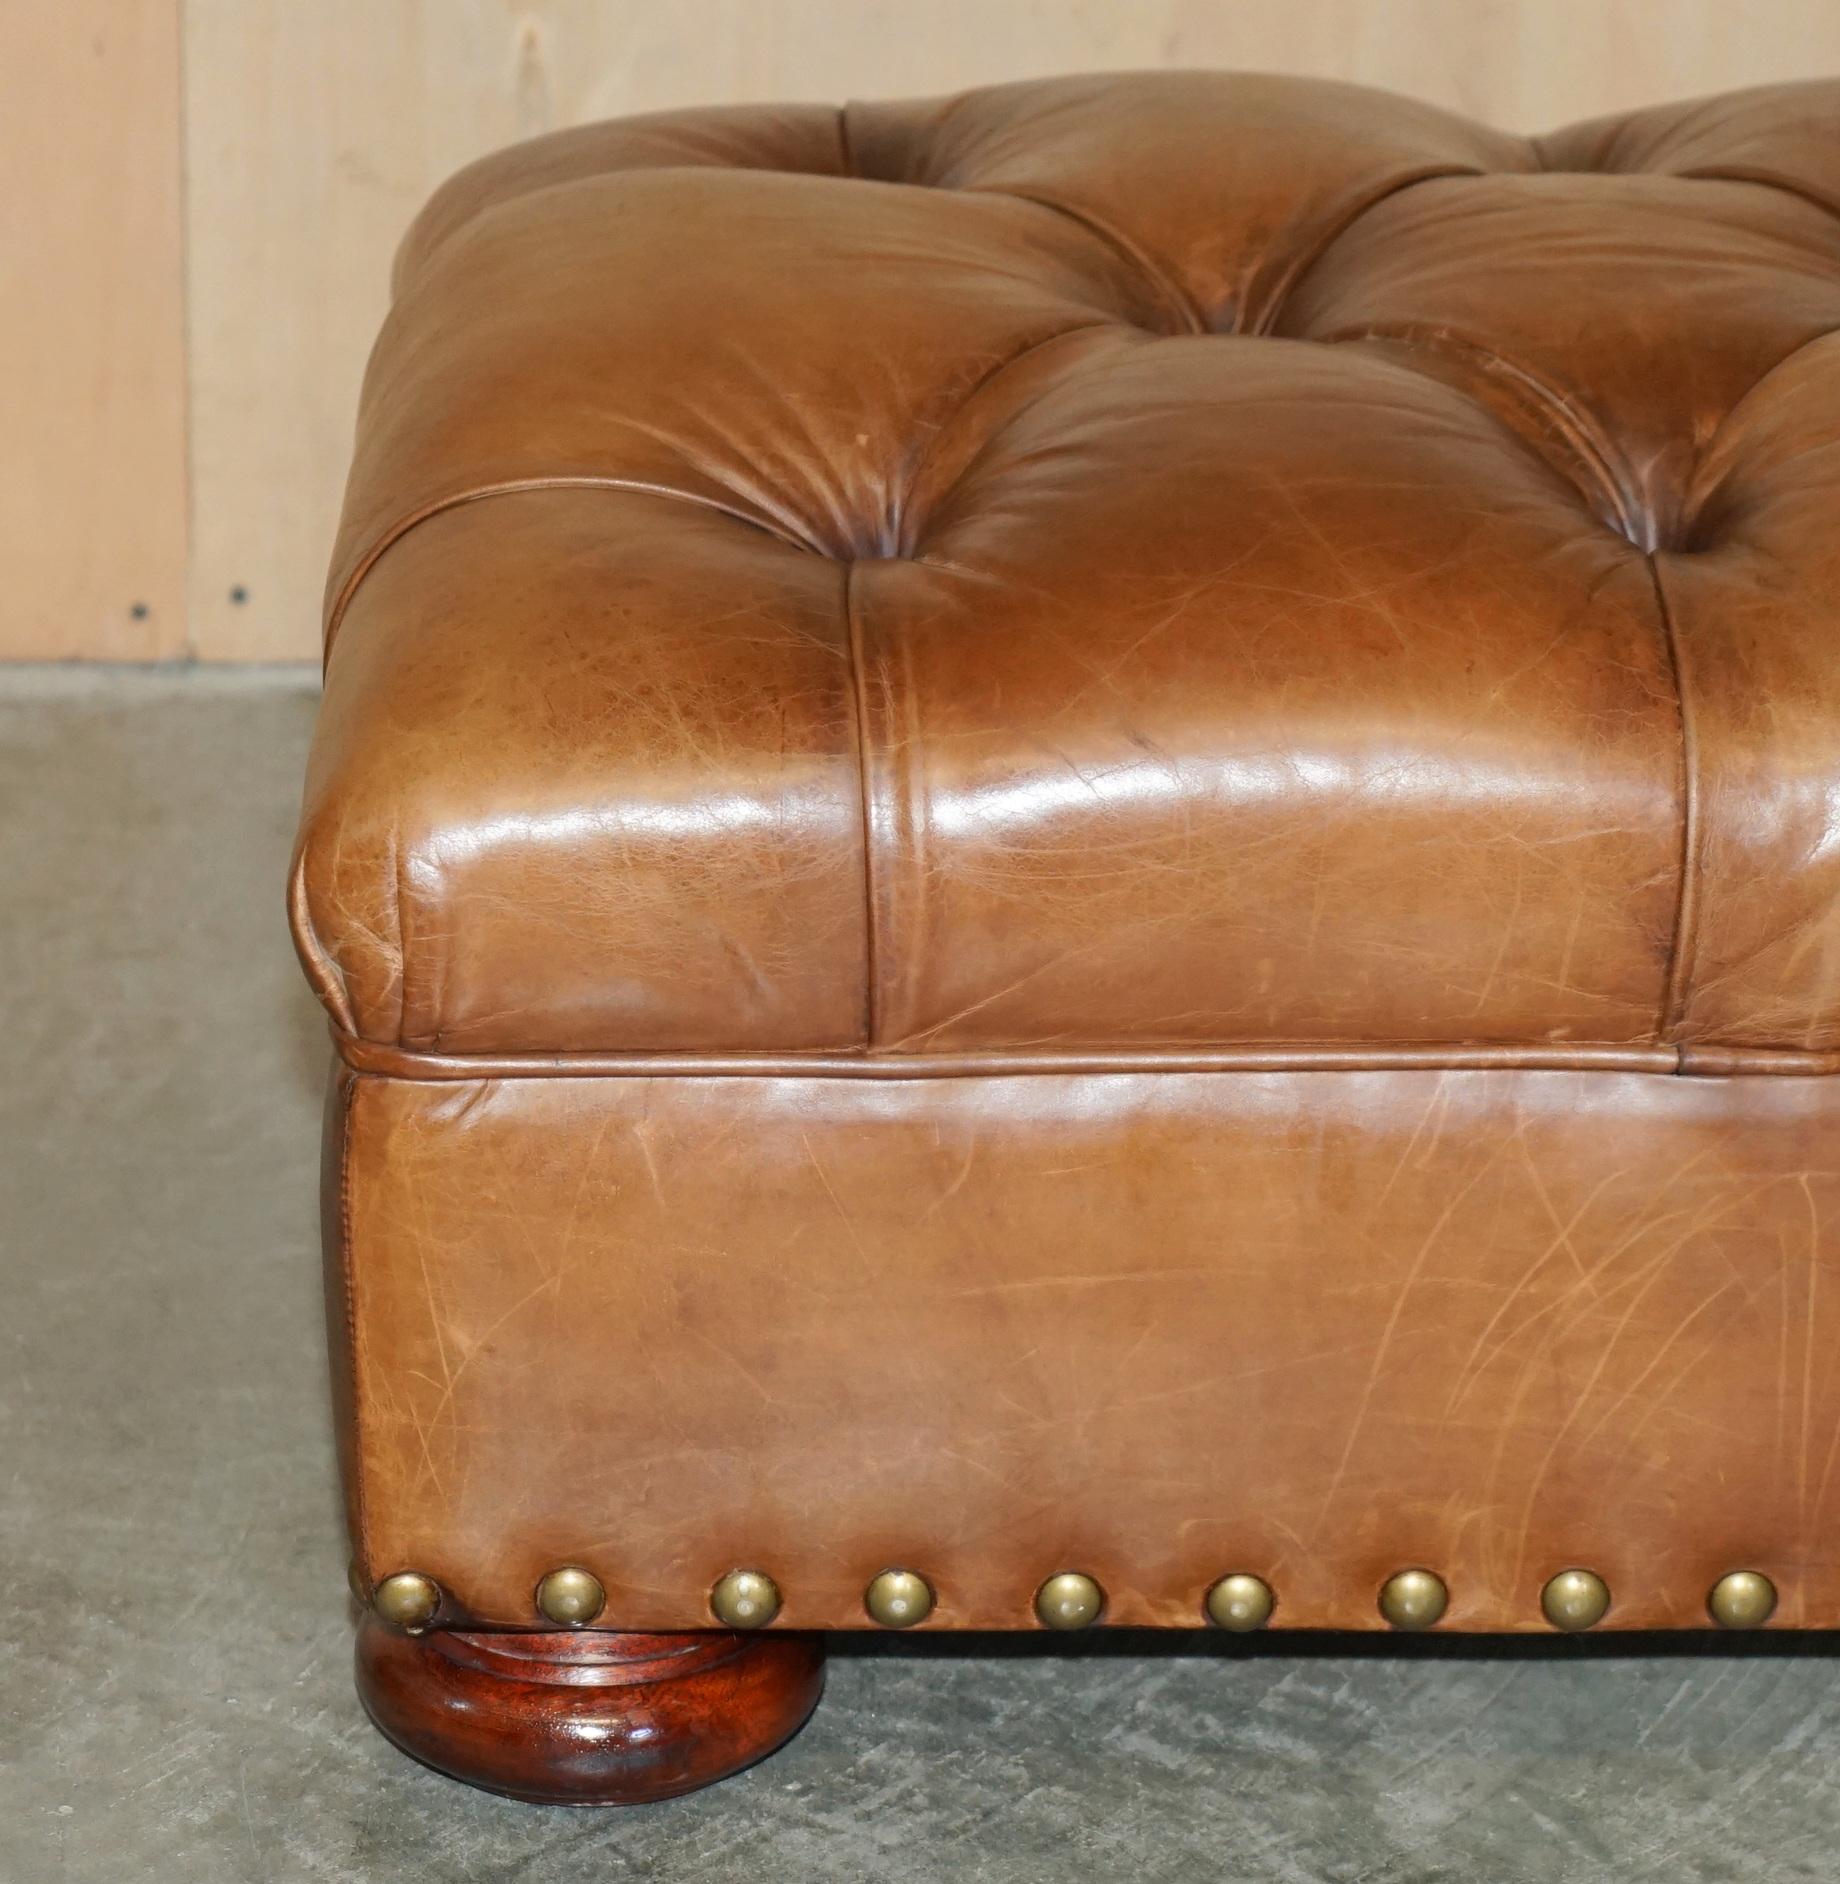 Chesterfield RALPH LAUREN WRITER'S CHESTERFIELD FOOTSTOOL OTTOMAN IN HERiTAGE BROWN LEATHER